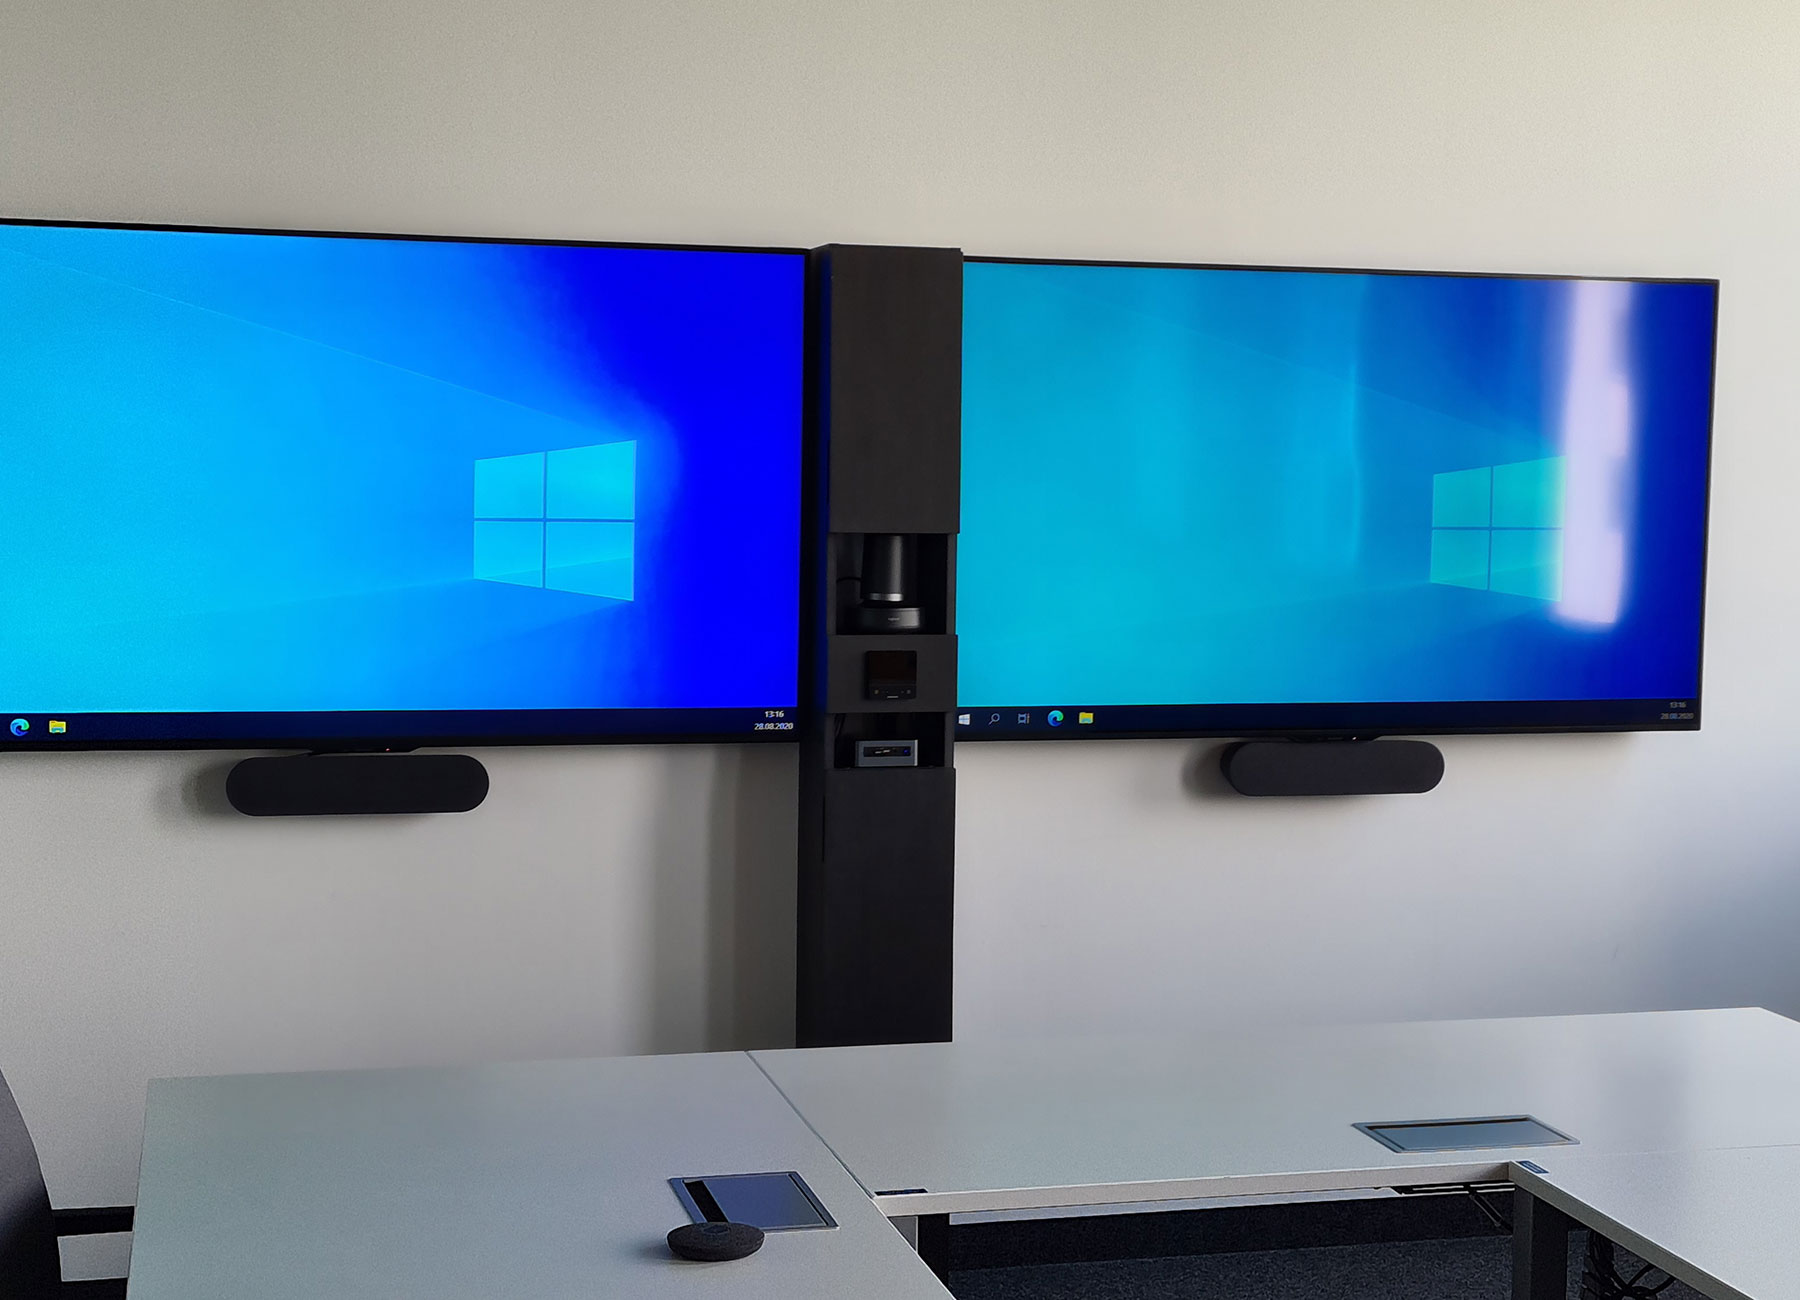 Windows twin monitor video conferencing setup